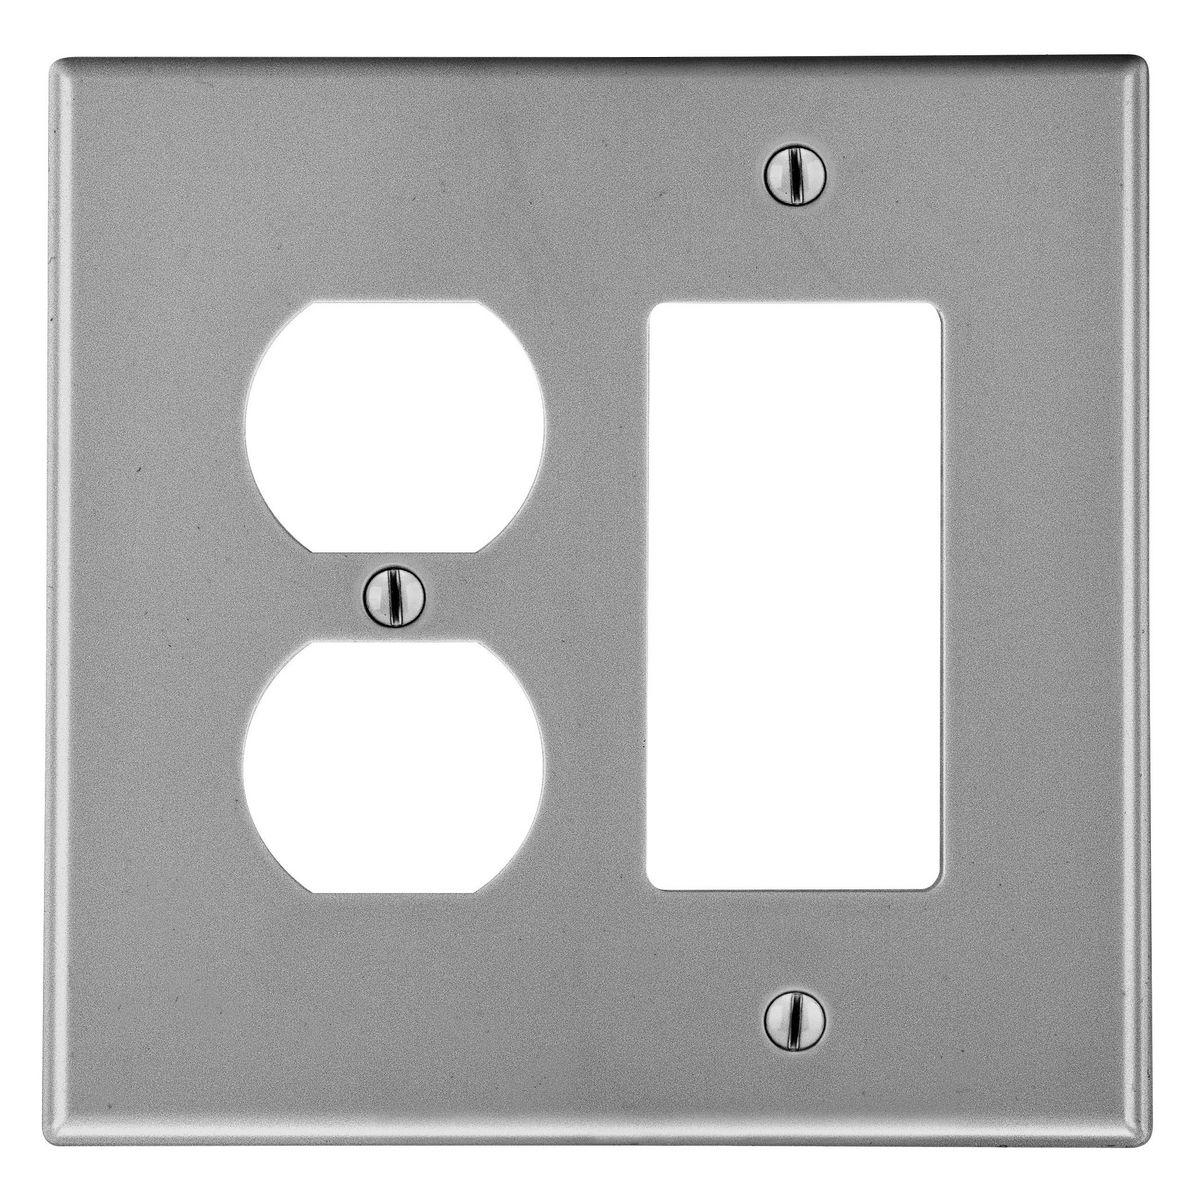 Hubbell P826GY Wallplate, 2-Gang,  1) Duplex 1) Decorator, Gray  ; High-impact, self-extinguishing polycarbonate material ; More Rigid ; Sharp lines and less dimpling ; Smooth satin finish ; Blends into wall with an optimum finish ; Smooth Satin Finish